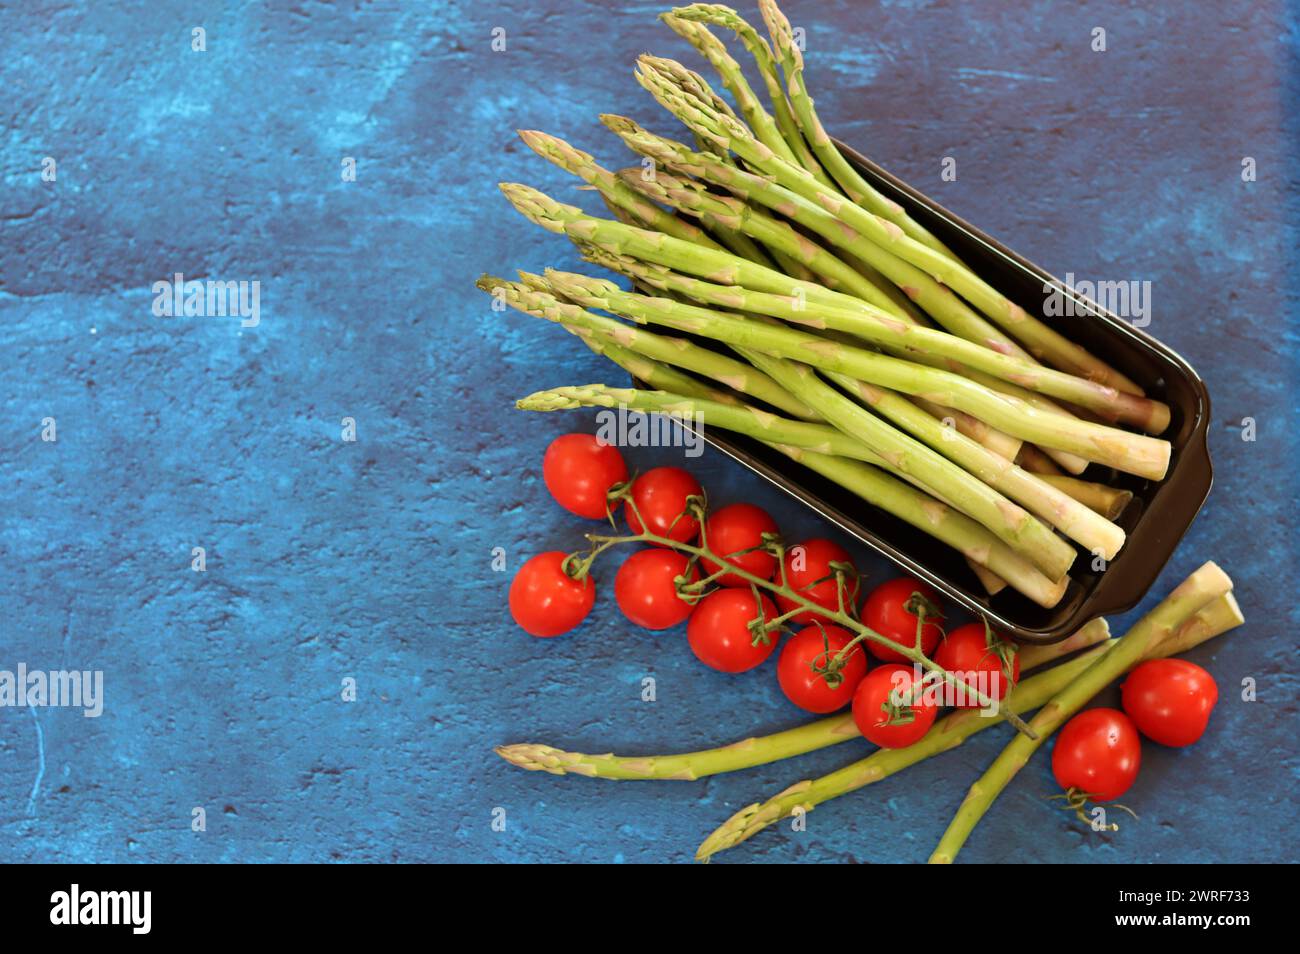 Bunch of fresh green asparagus close up  photo. Raw asparagus top view. Healthy eating concept. Natural vitamins and antioxidants. Stock Photo